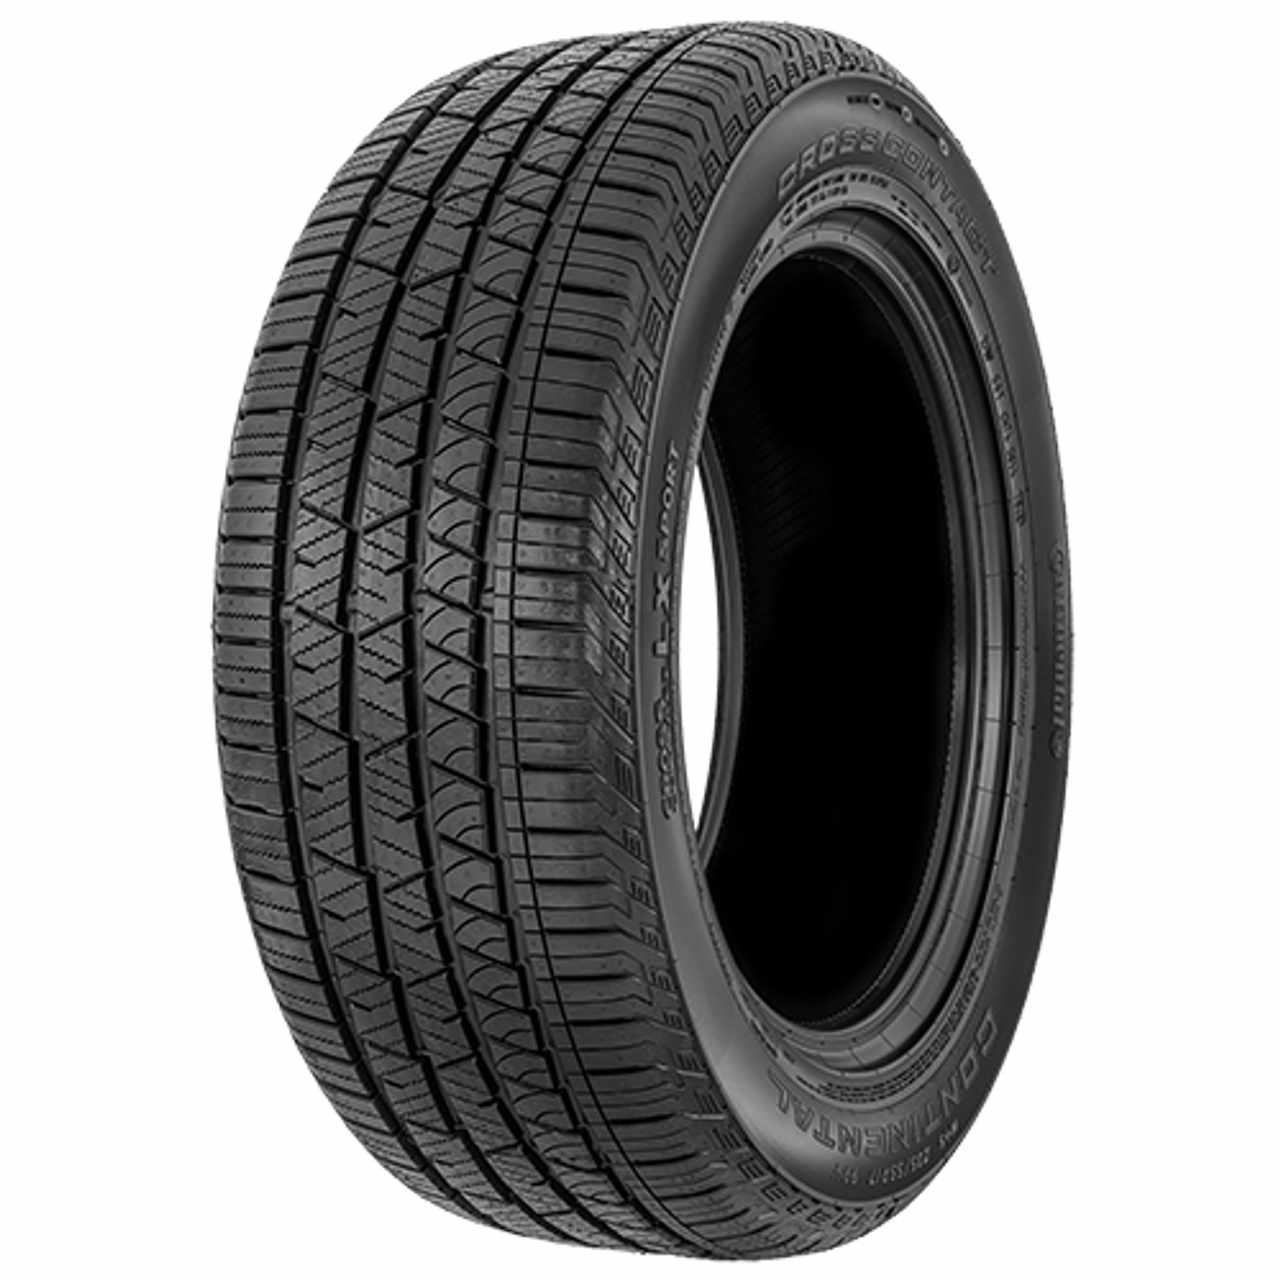 CONTINENTAL CROSSCONTACT LX SPORT (MO) (EVc) 275/45R21 107H FR BSW